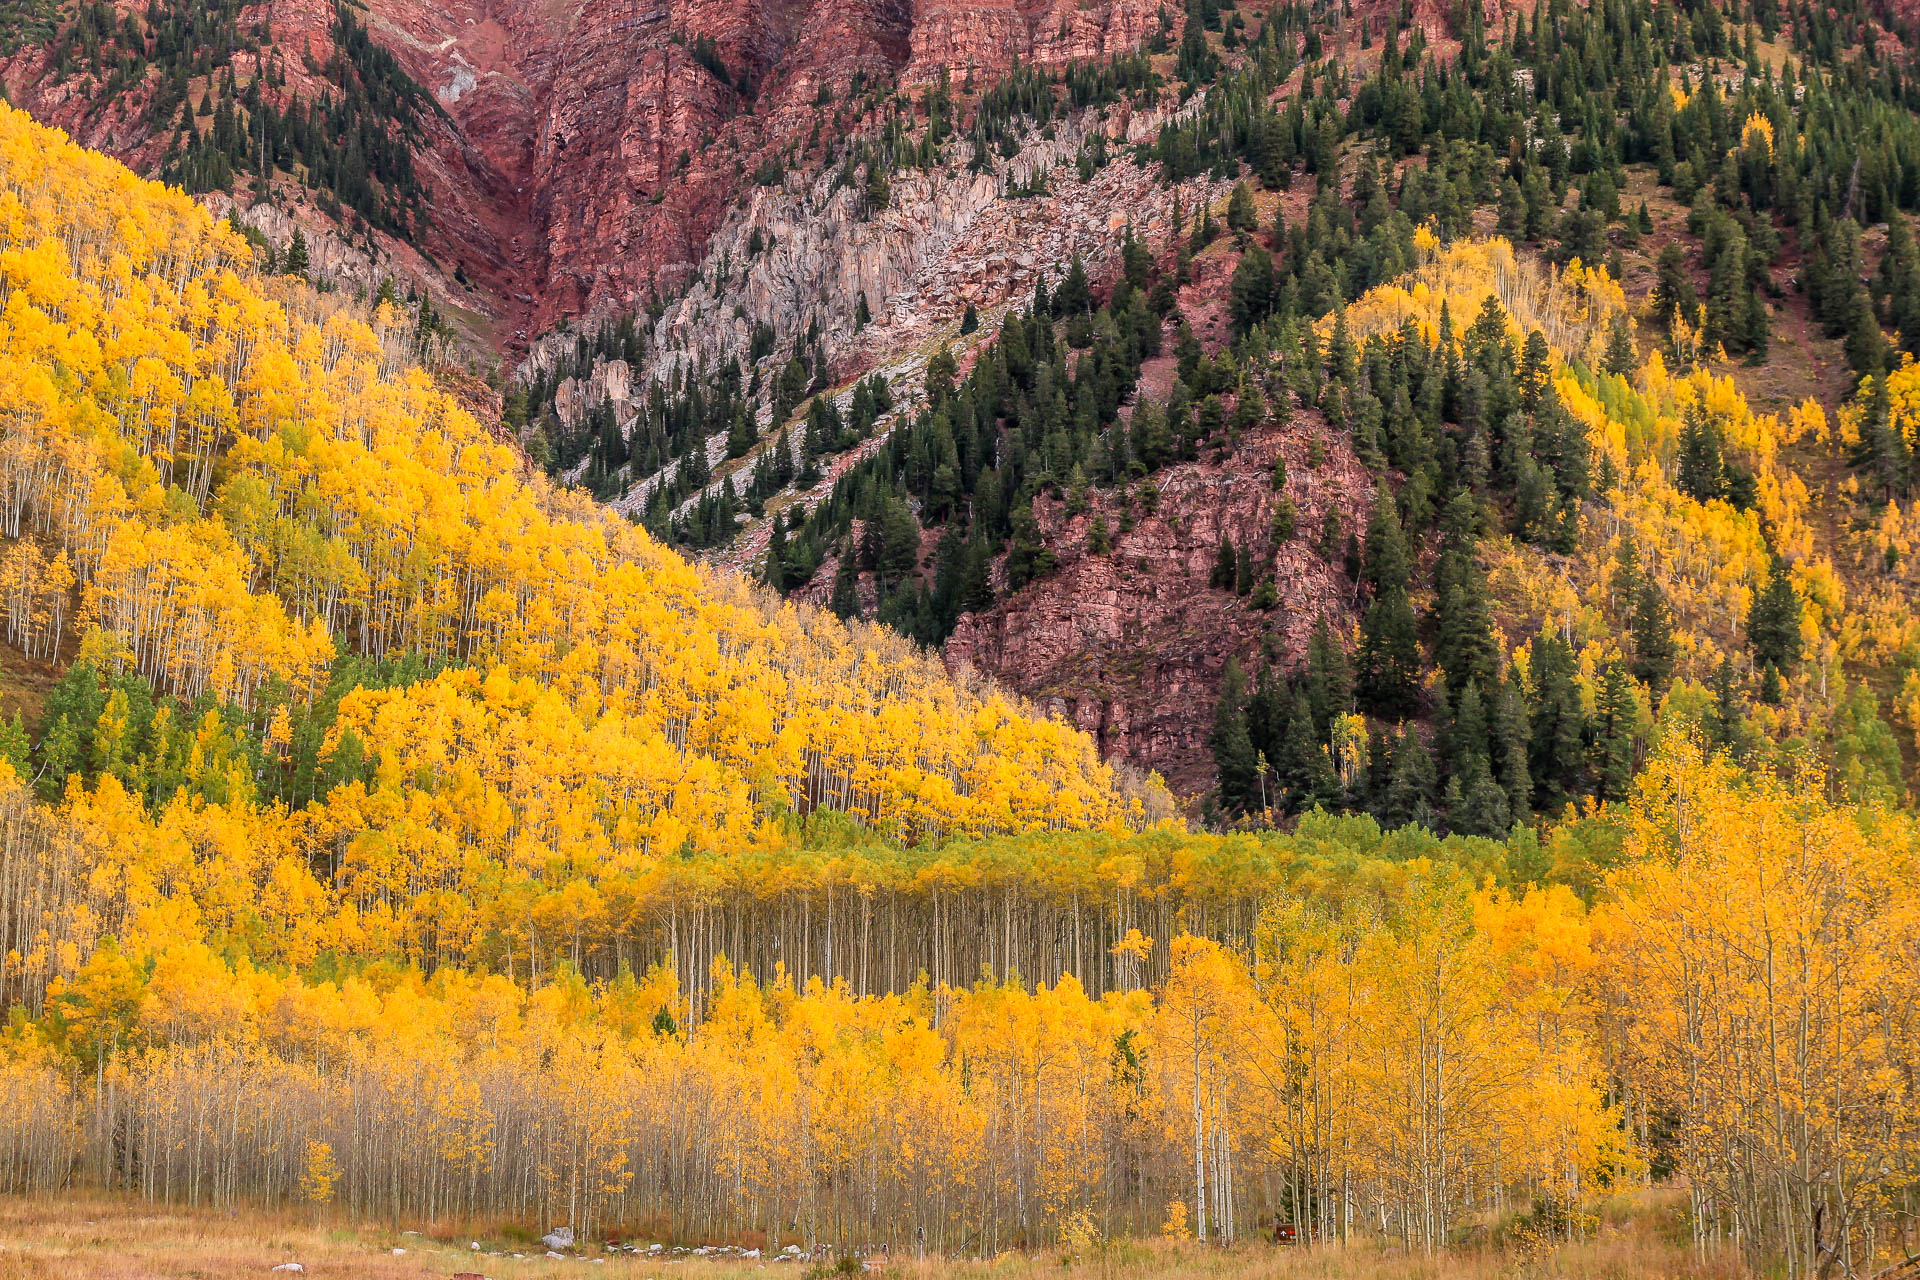 Contrast of the autumn colours against the rock (Maroon Lake, Colorado)